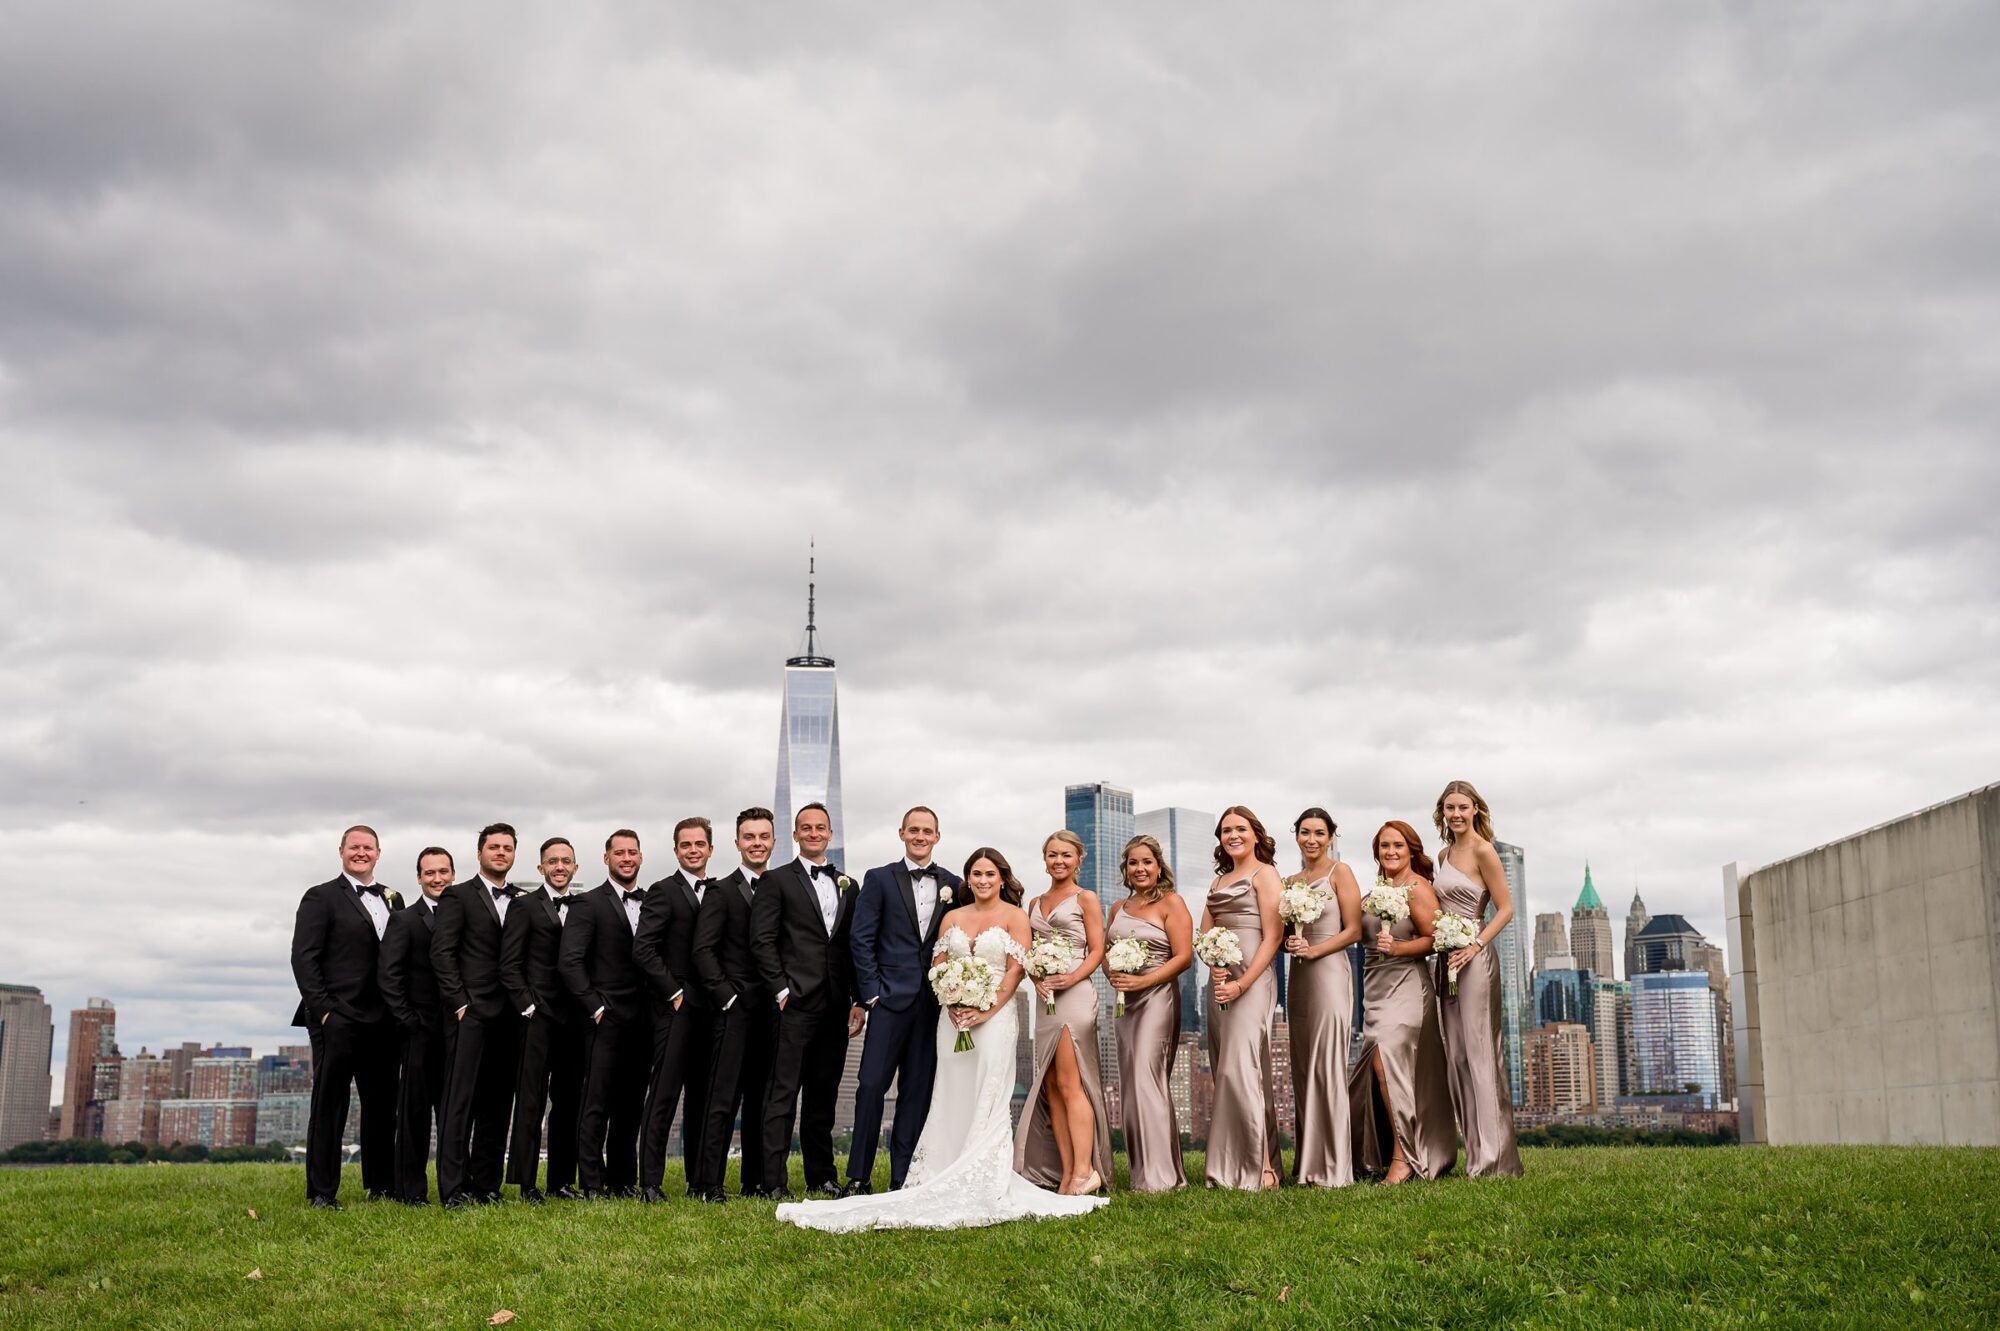 Wedding party in front of the manhattan skyline.